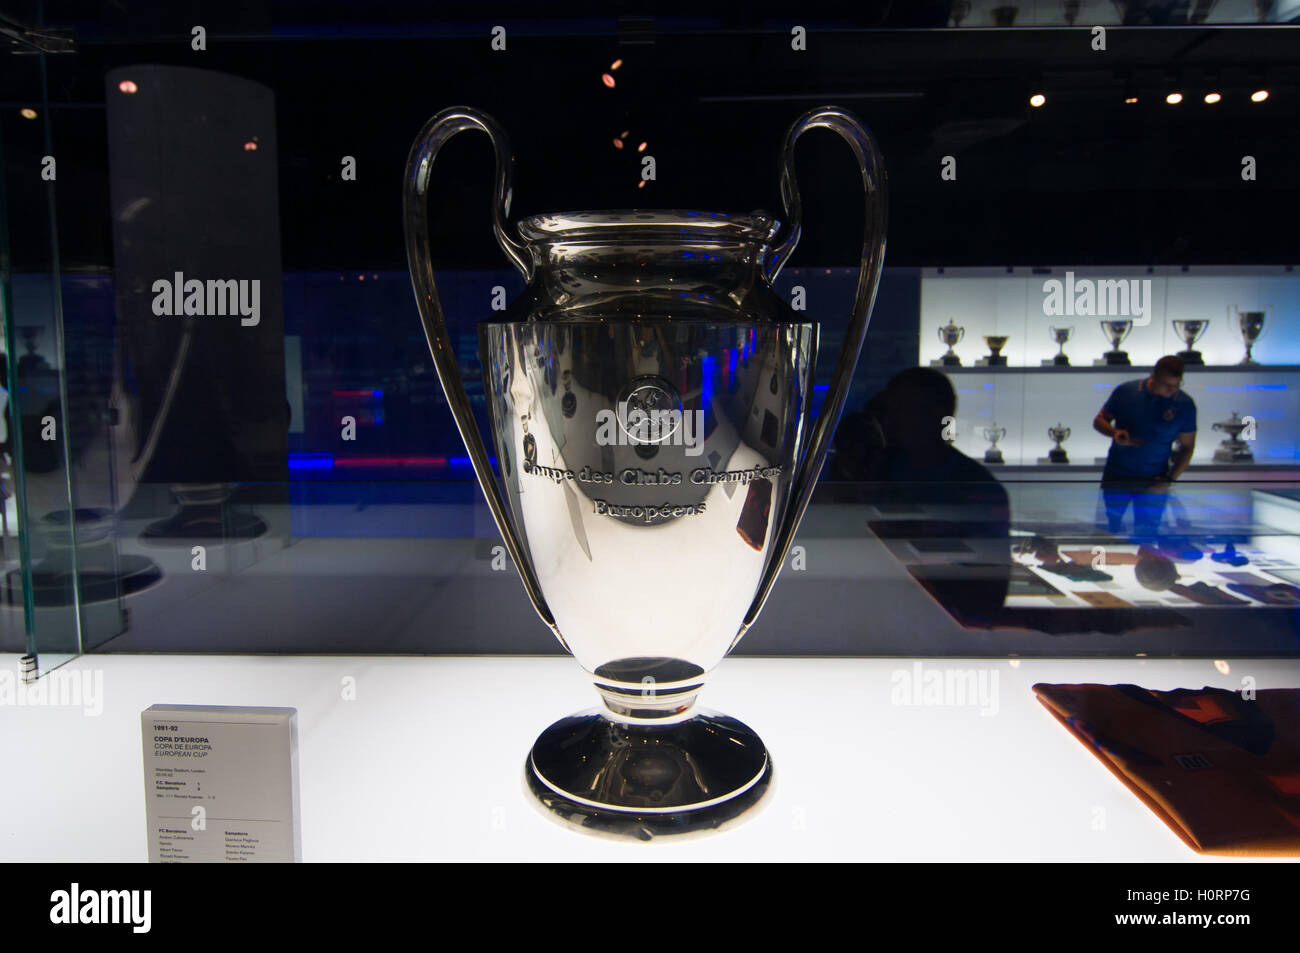 BARCELONA - SEPTEMBER 22, 2014: UEFA Champions League Cup in museum. UEFA Cup - trophy awarded annually by UEFA. Stock Photo